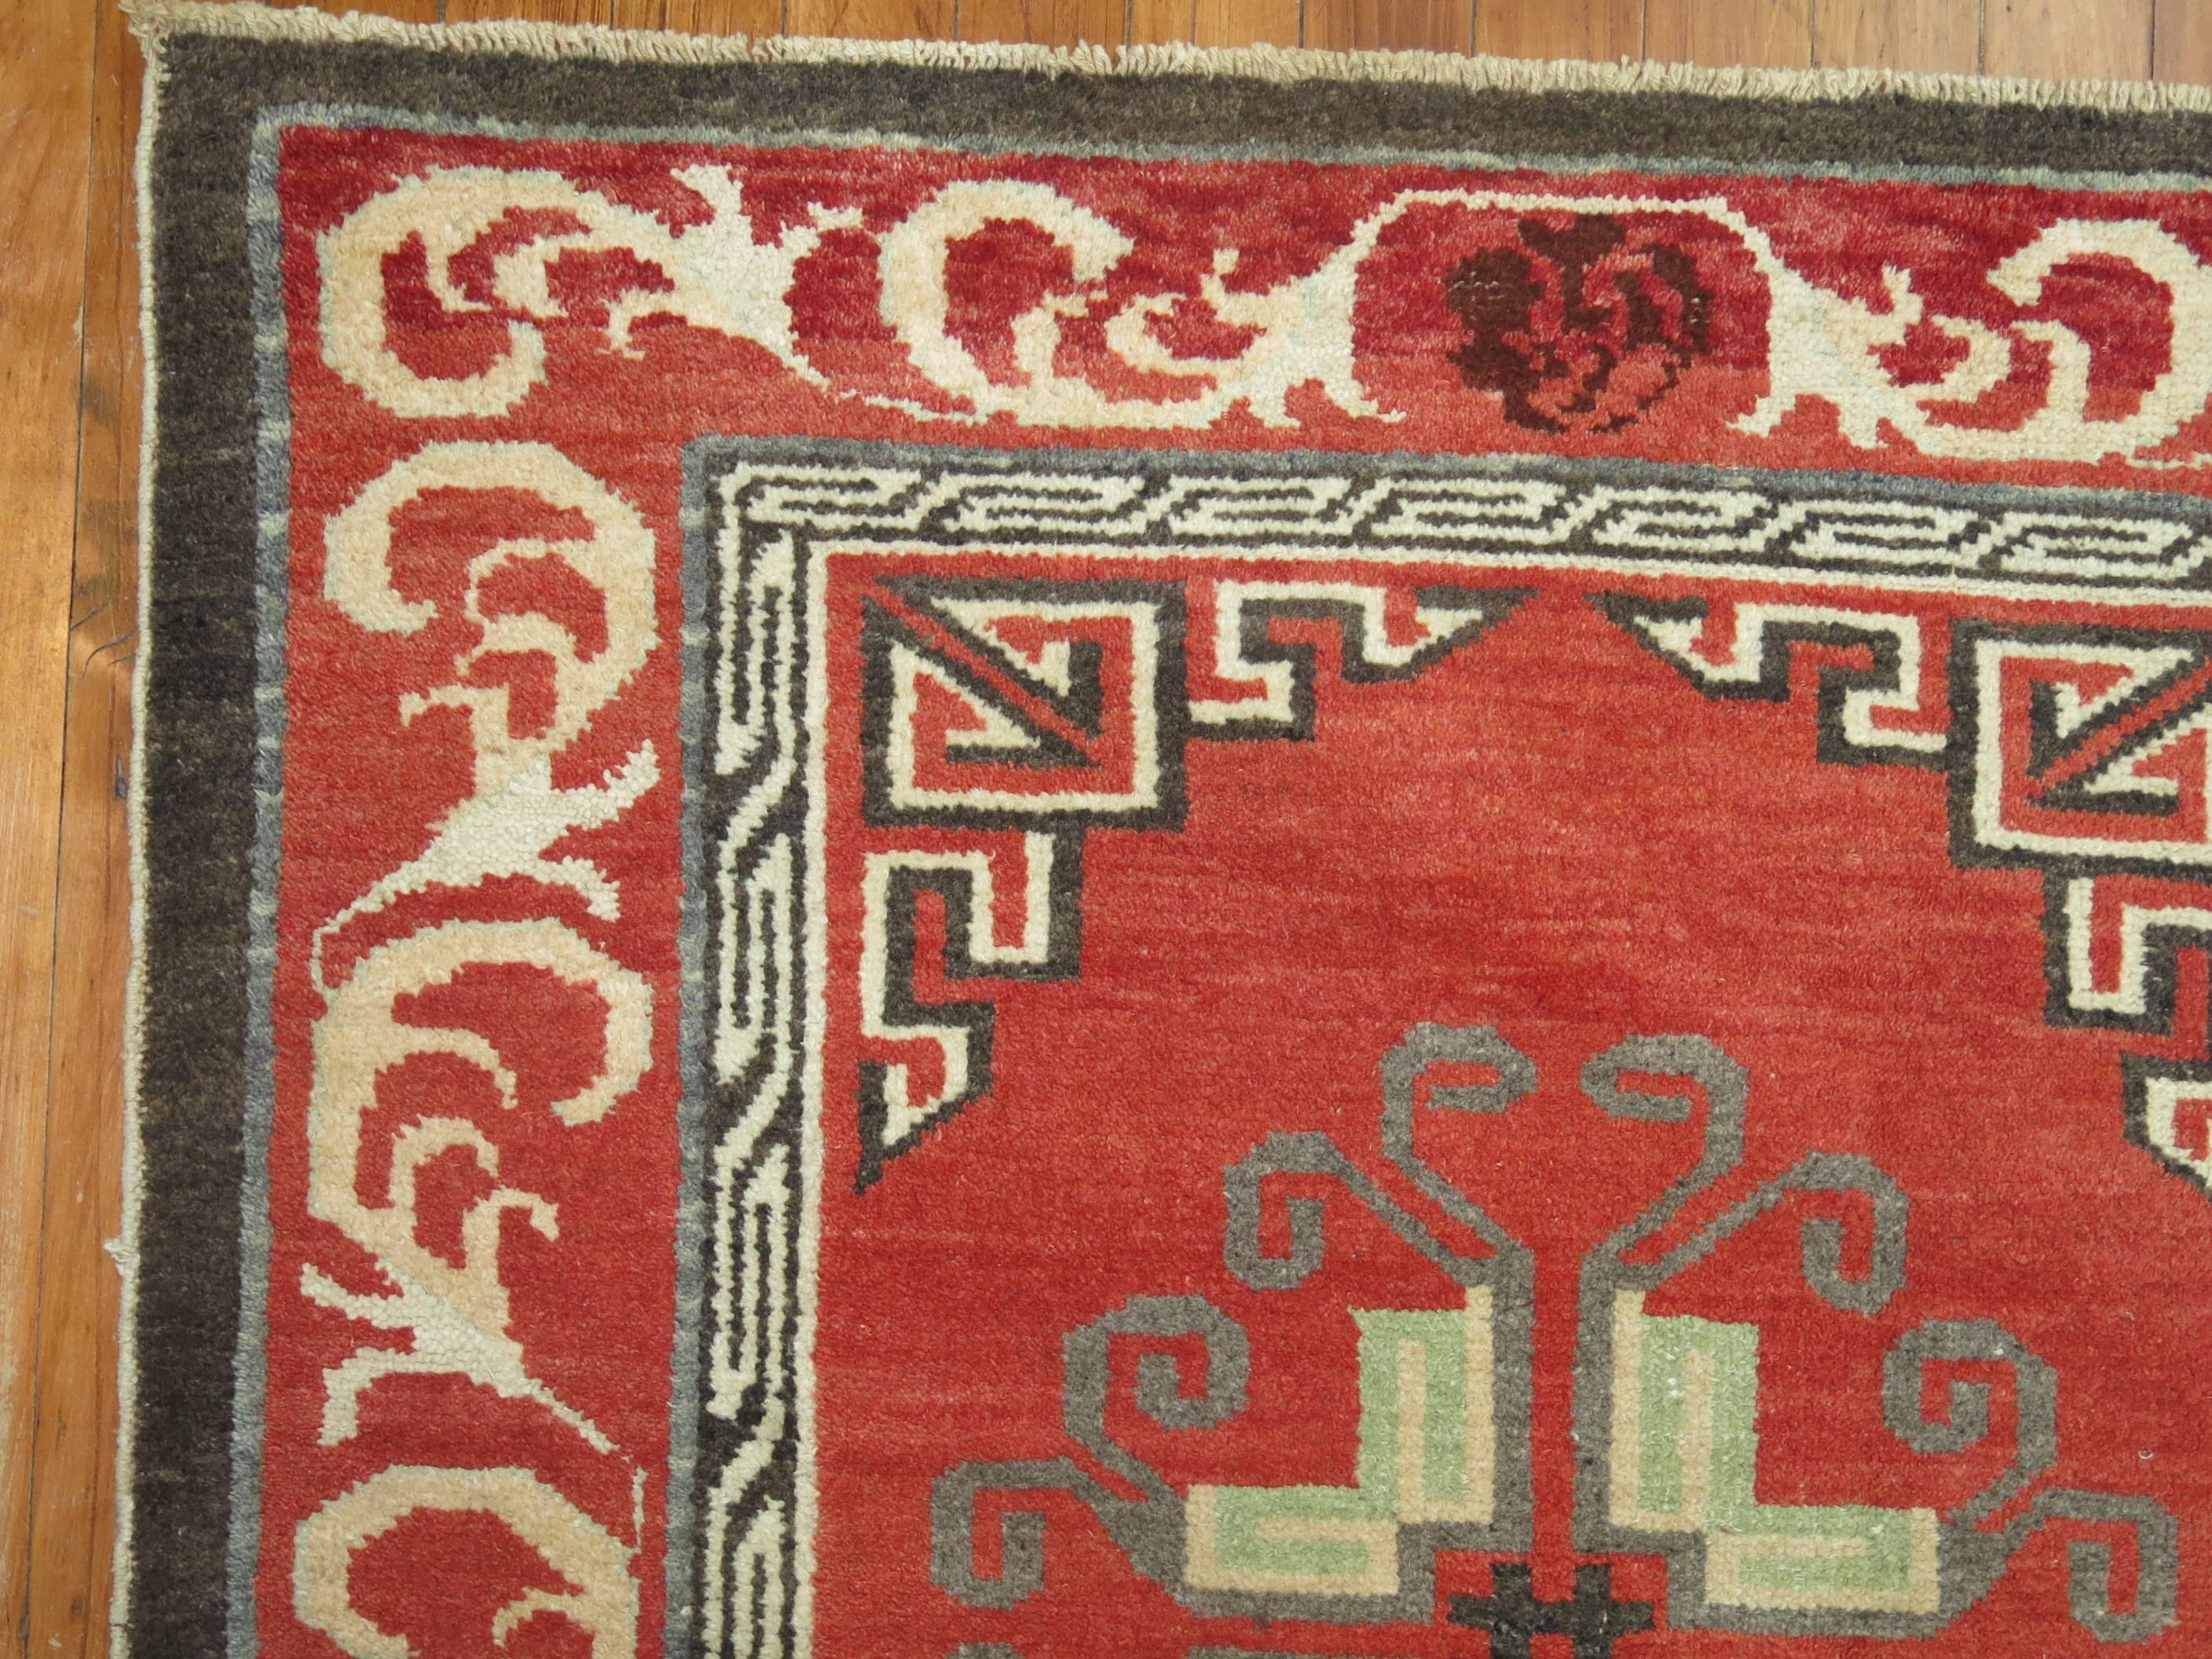 20th Century Red Vintage Turkish Rug Inspired by 19th Century Asian Khotan Rugs For Sale